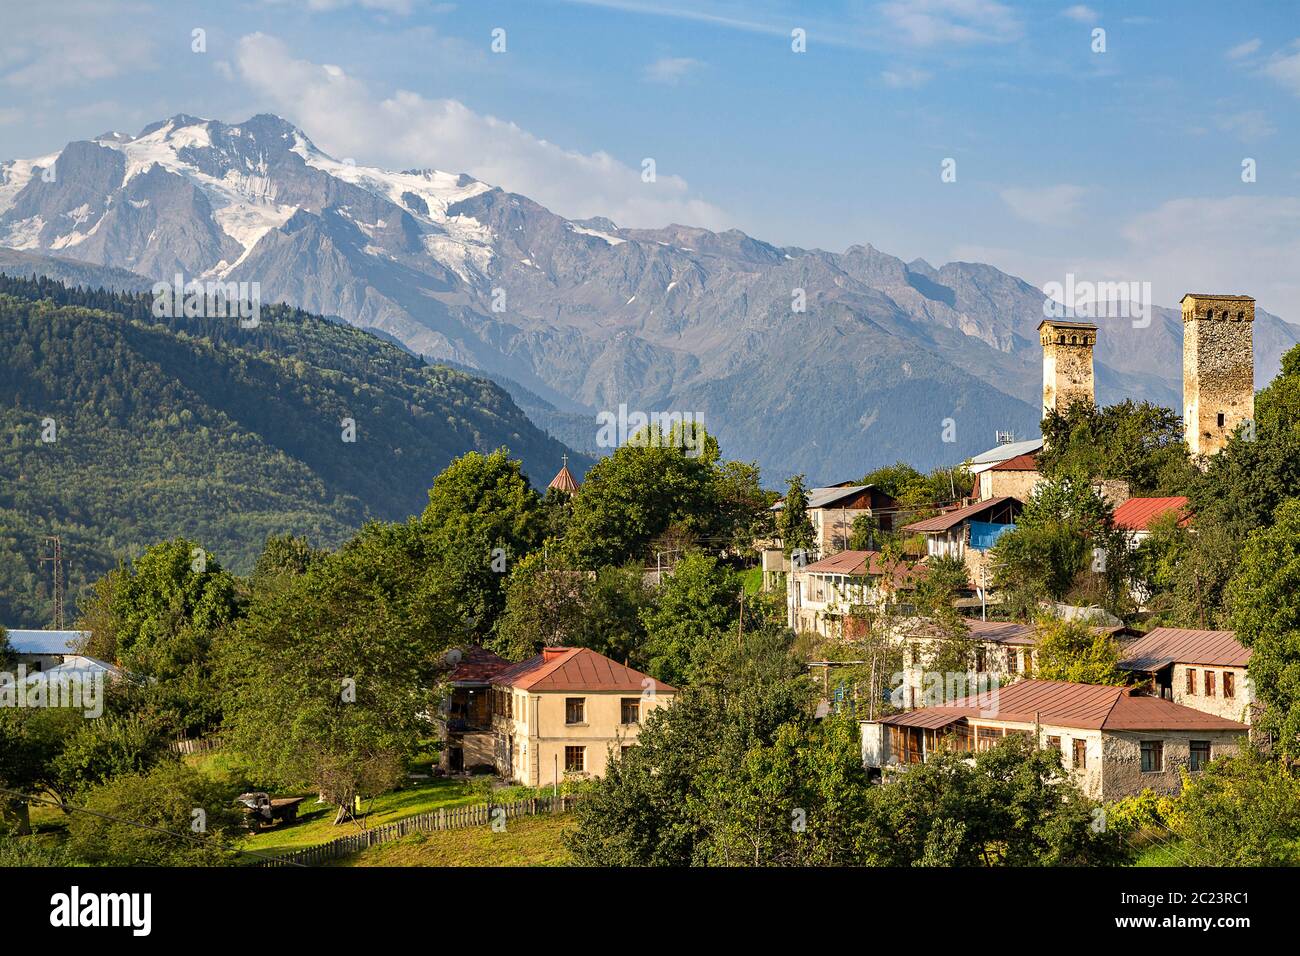 Village houses with towers in Caucasus Mountains, Georgia Stock Photo